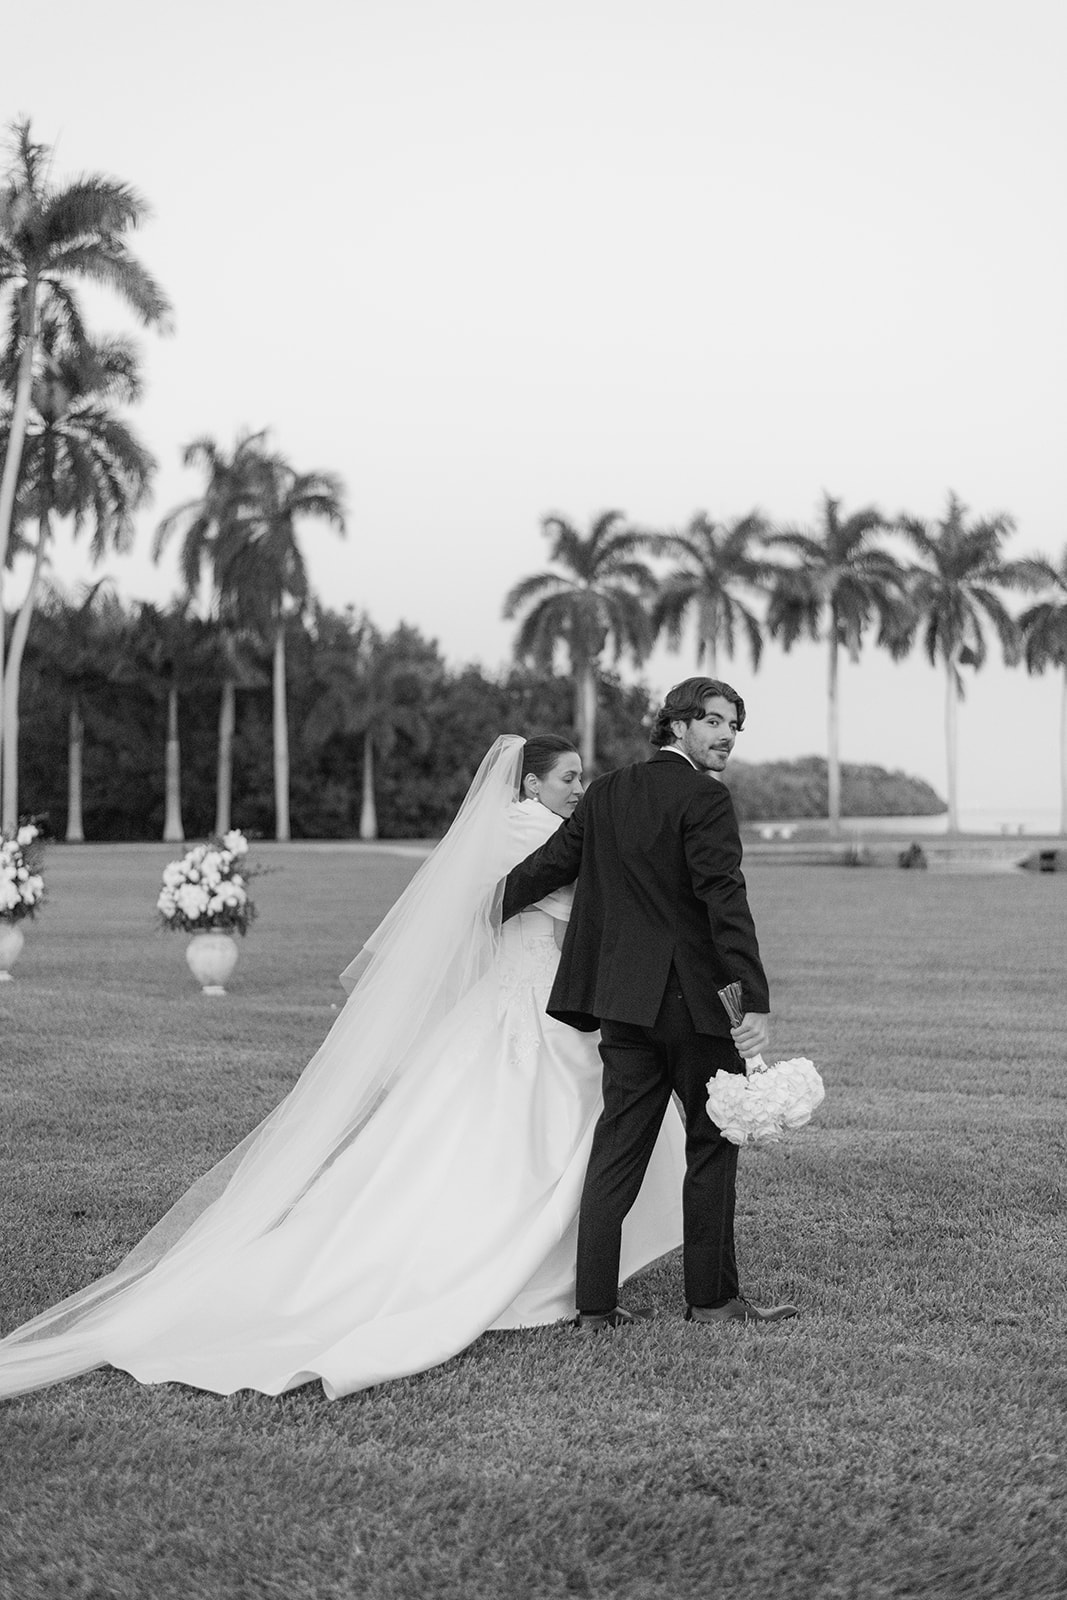 Capturing the essence of love at Bales & Shelby's Deering Estate Wedding in Miami Florida
